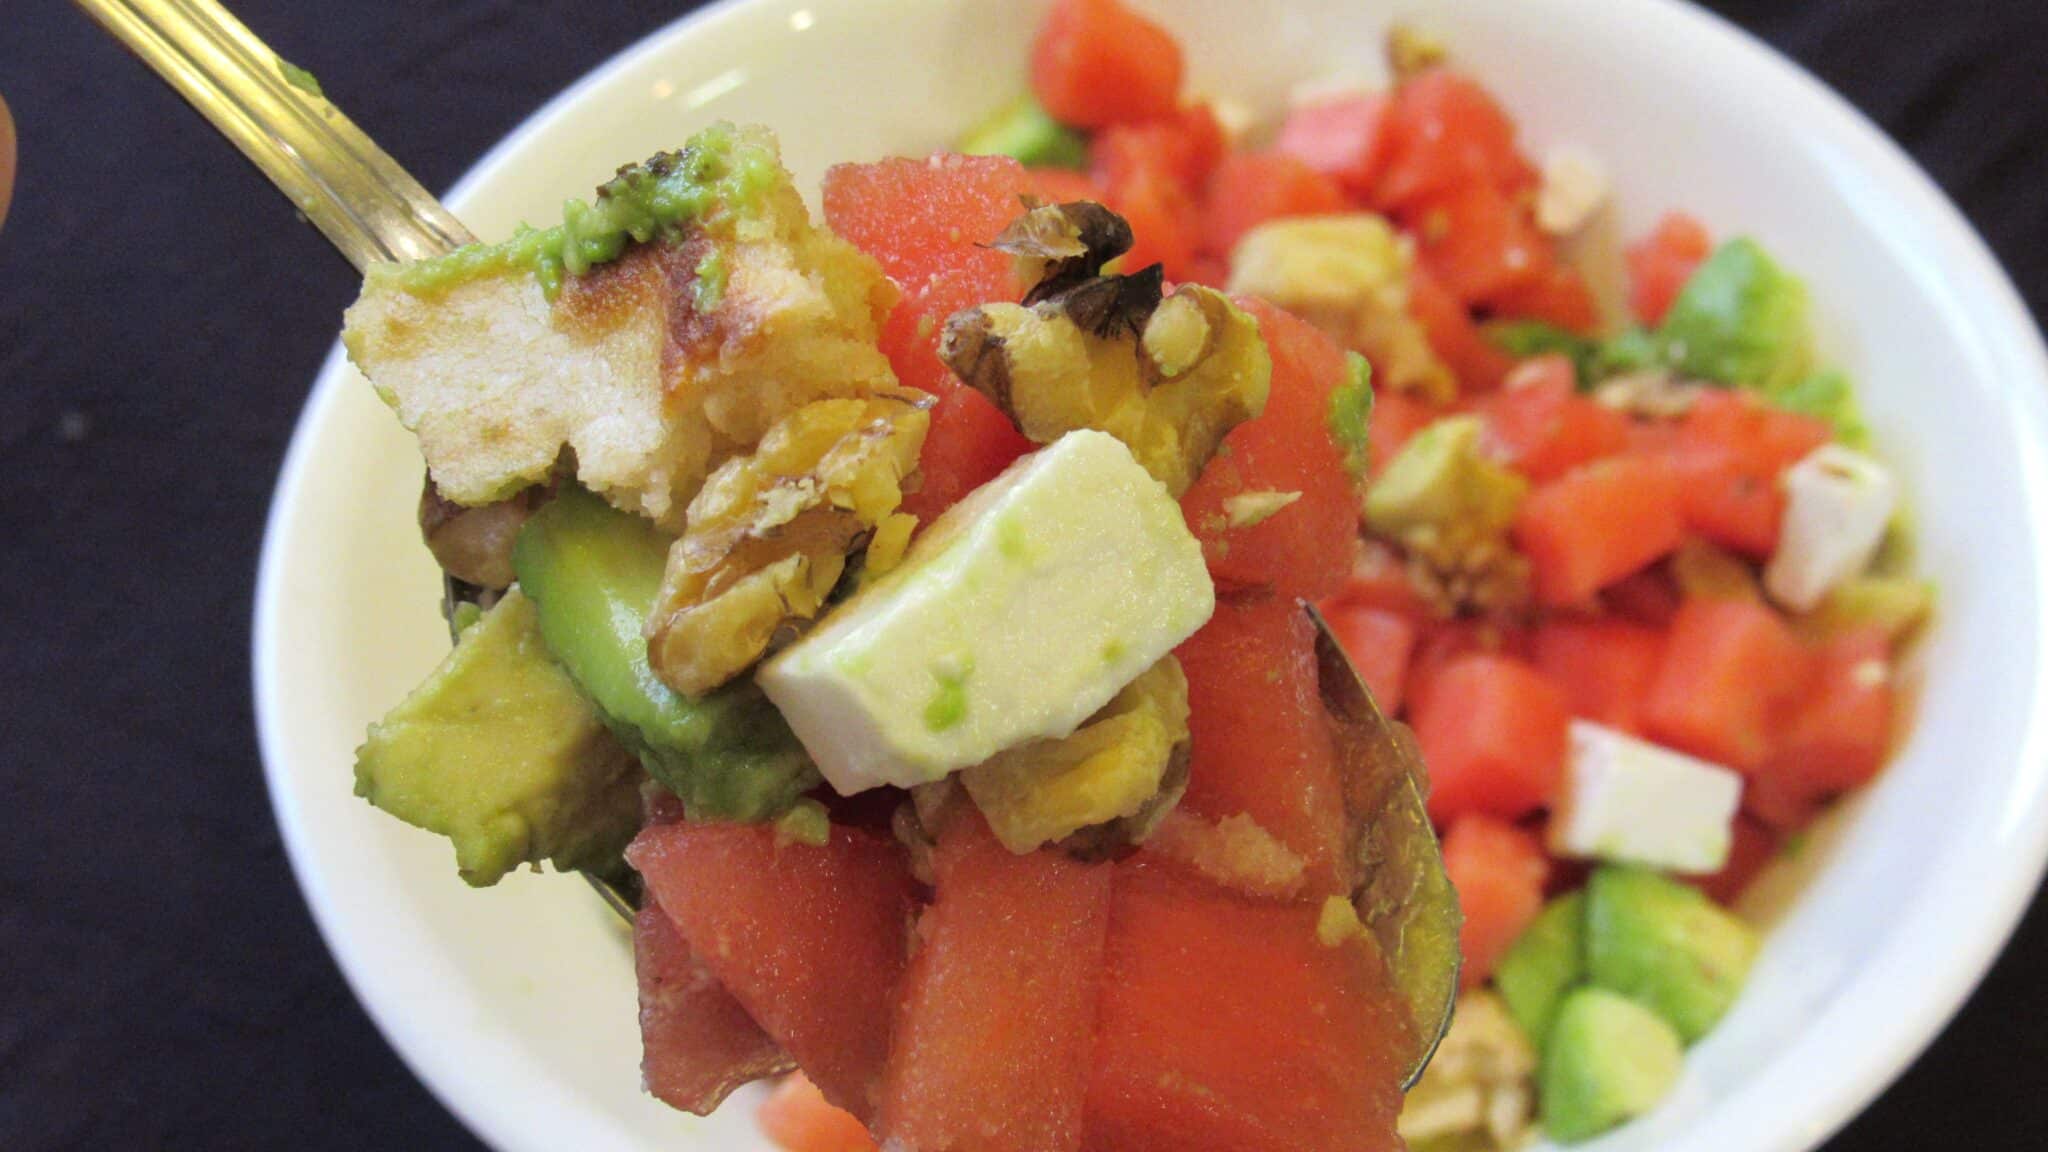 All the watermelon salad ingredients are mixed and served—a close-up image of a spoon full of watermelon salad.